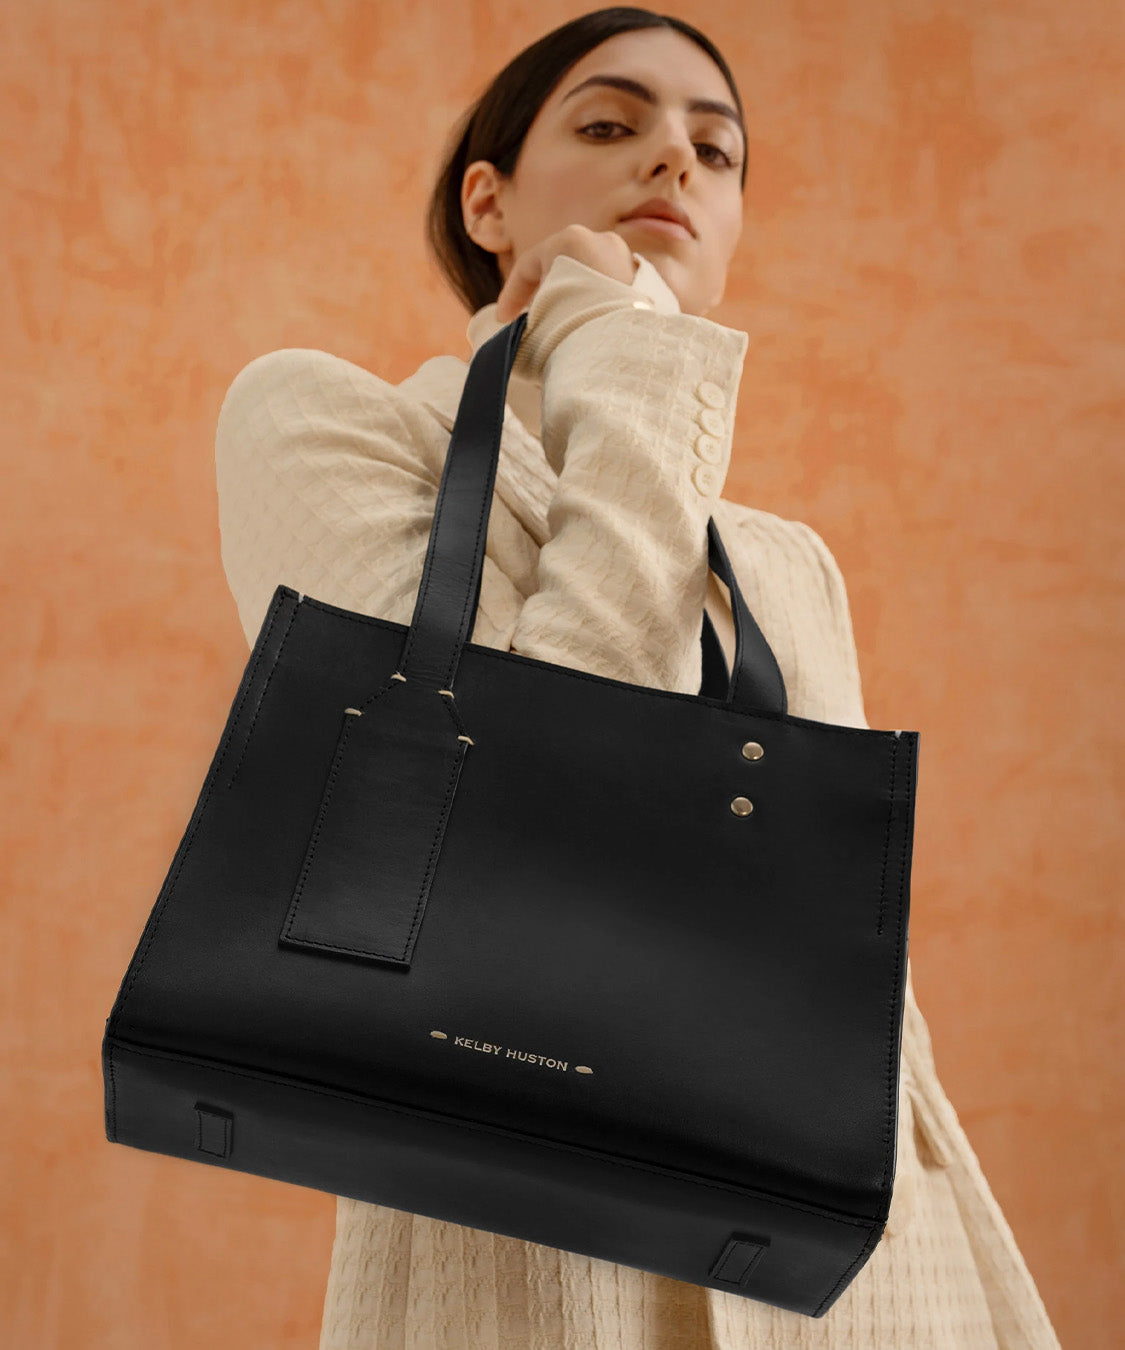 Structured Handbags Are The Big Purse Trend Of The Season | FASHION